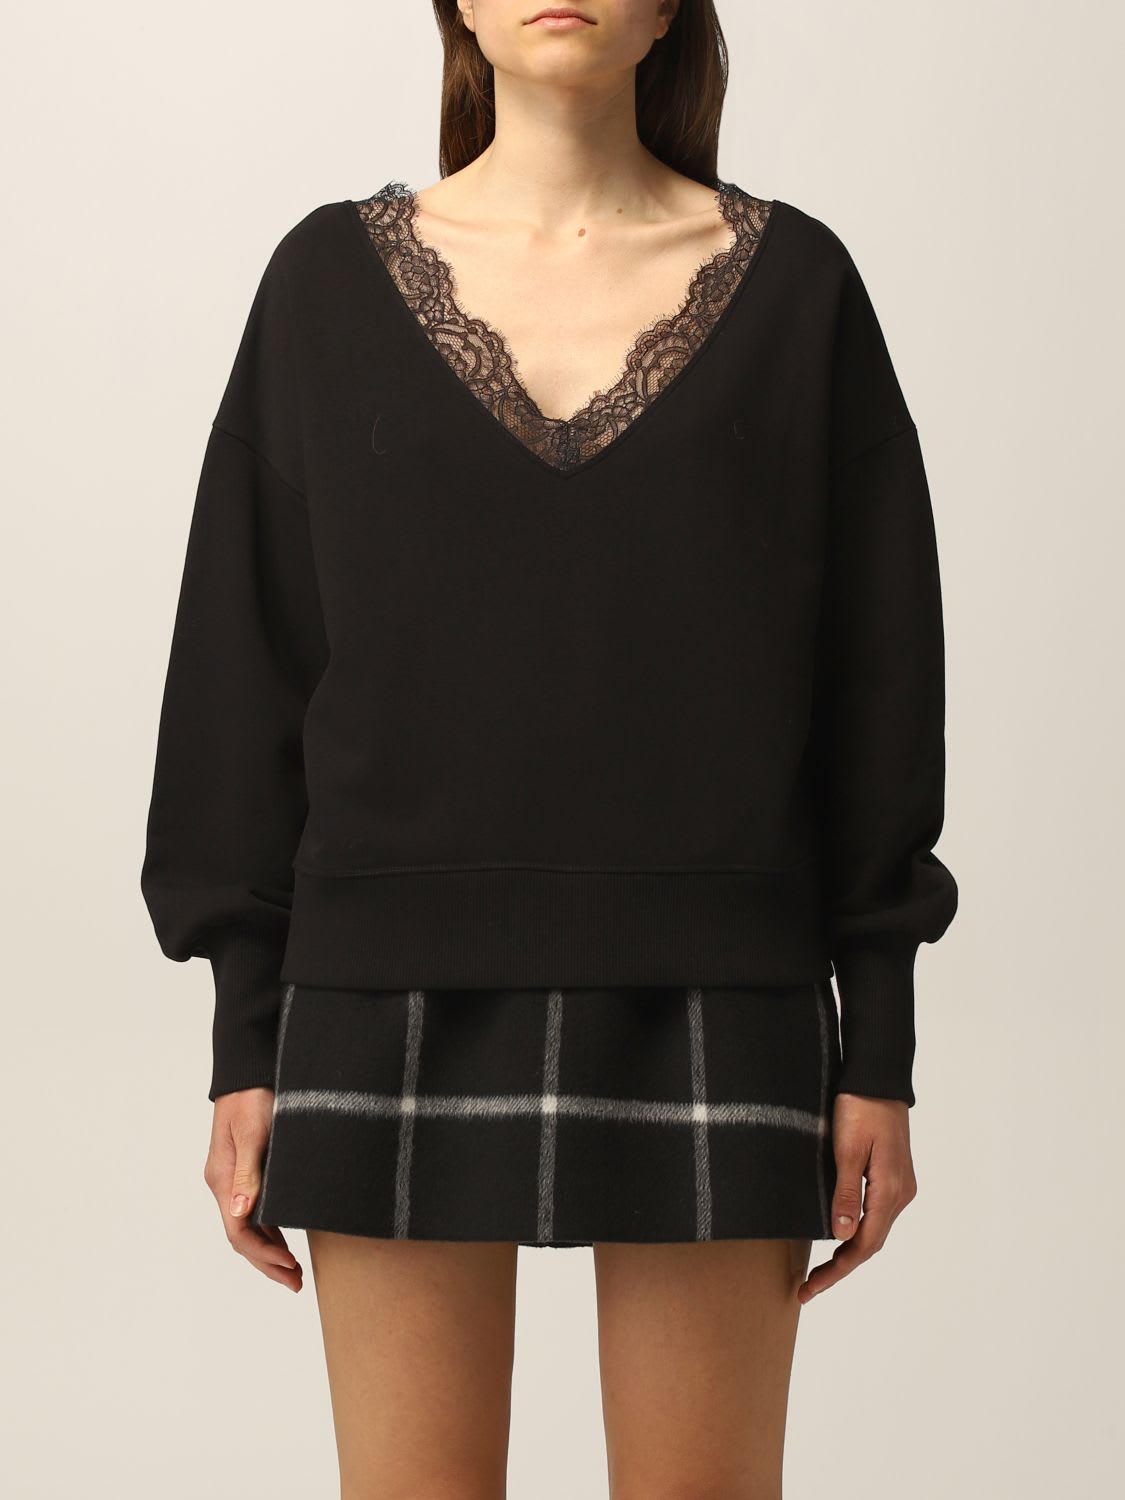 Red Valentino Sweatshirt Red Valentino Sweatshirt In Jersey And Lace